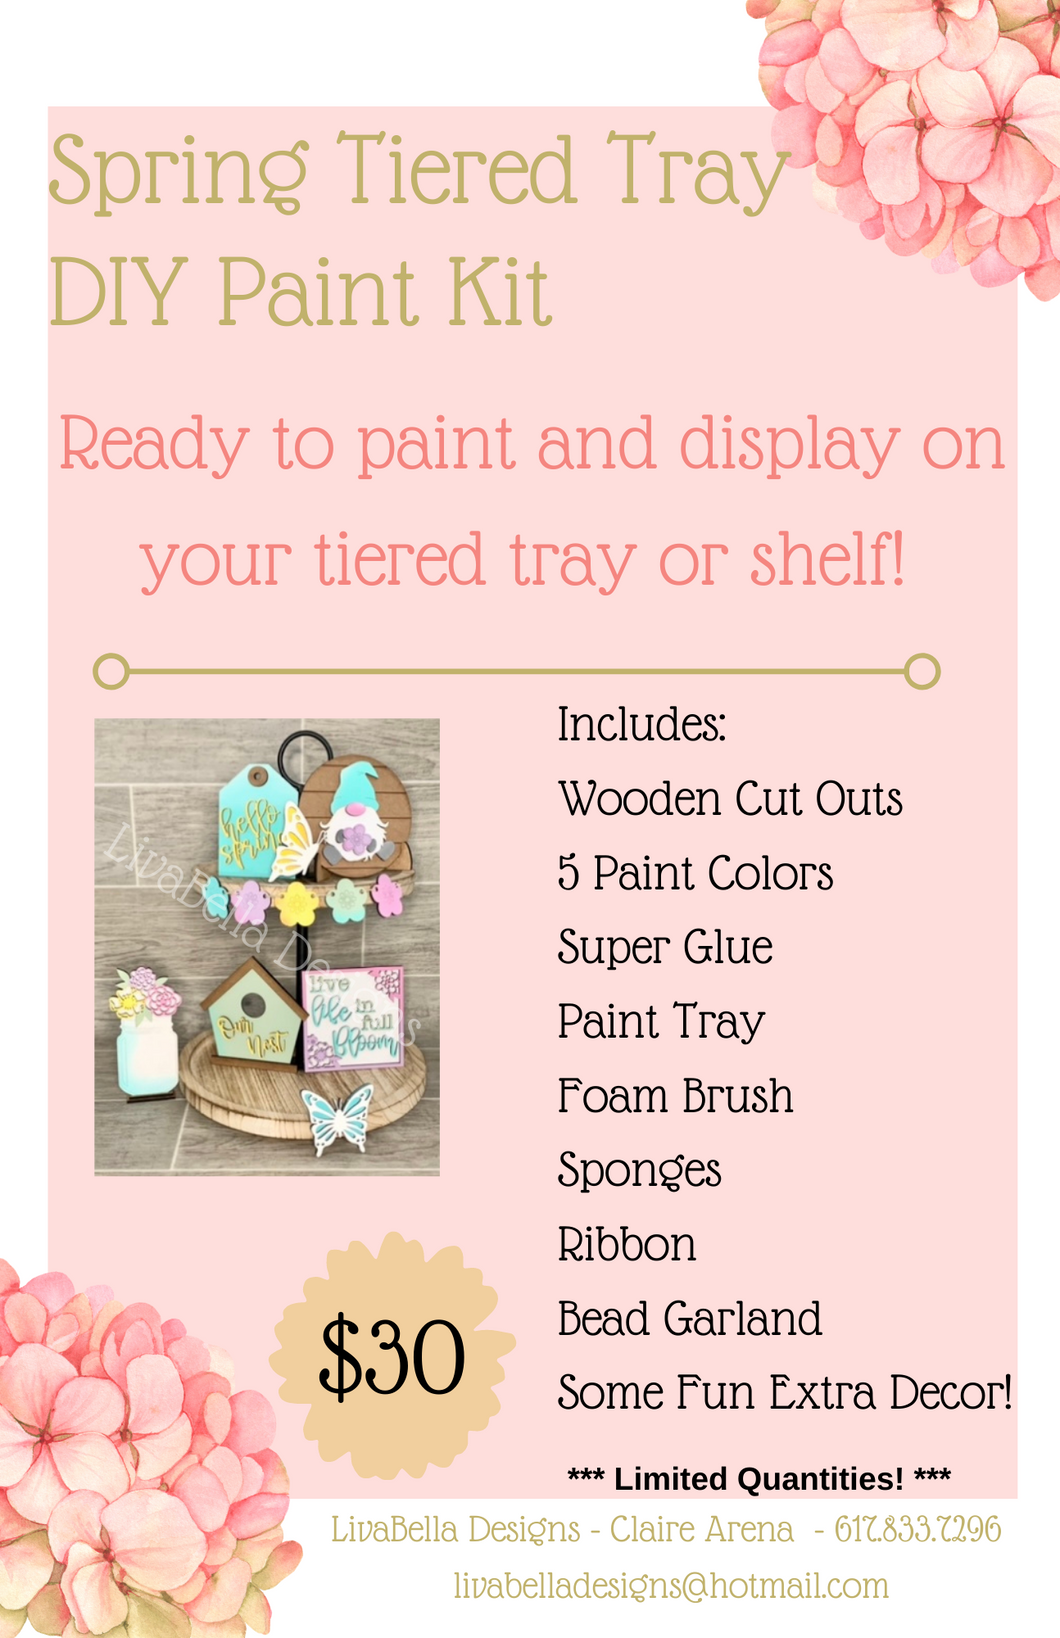 Spring Tiered Tray DIY Paint Kit